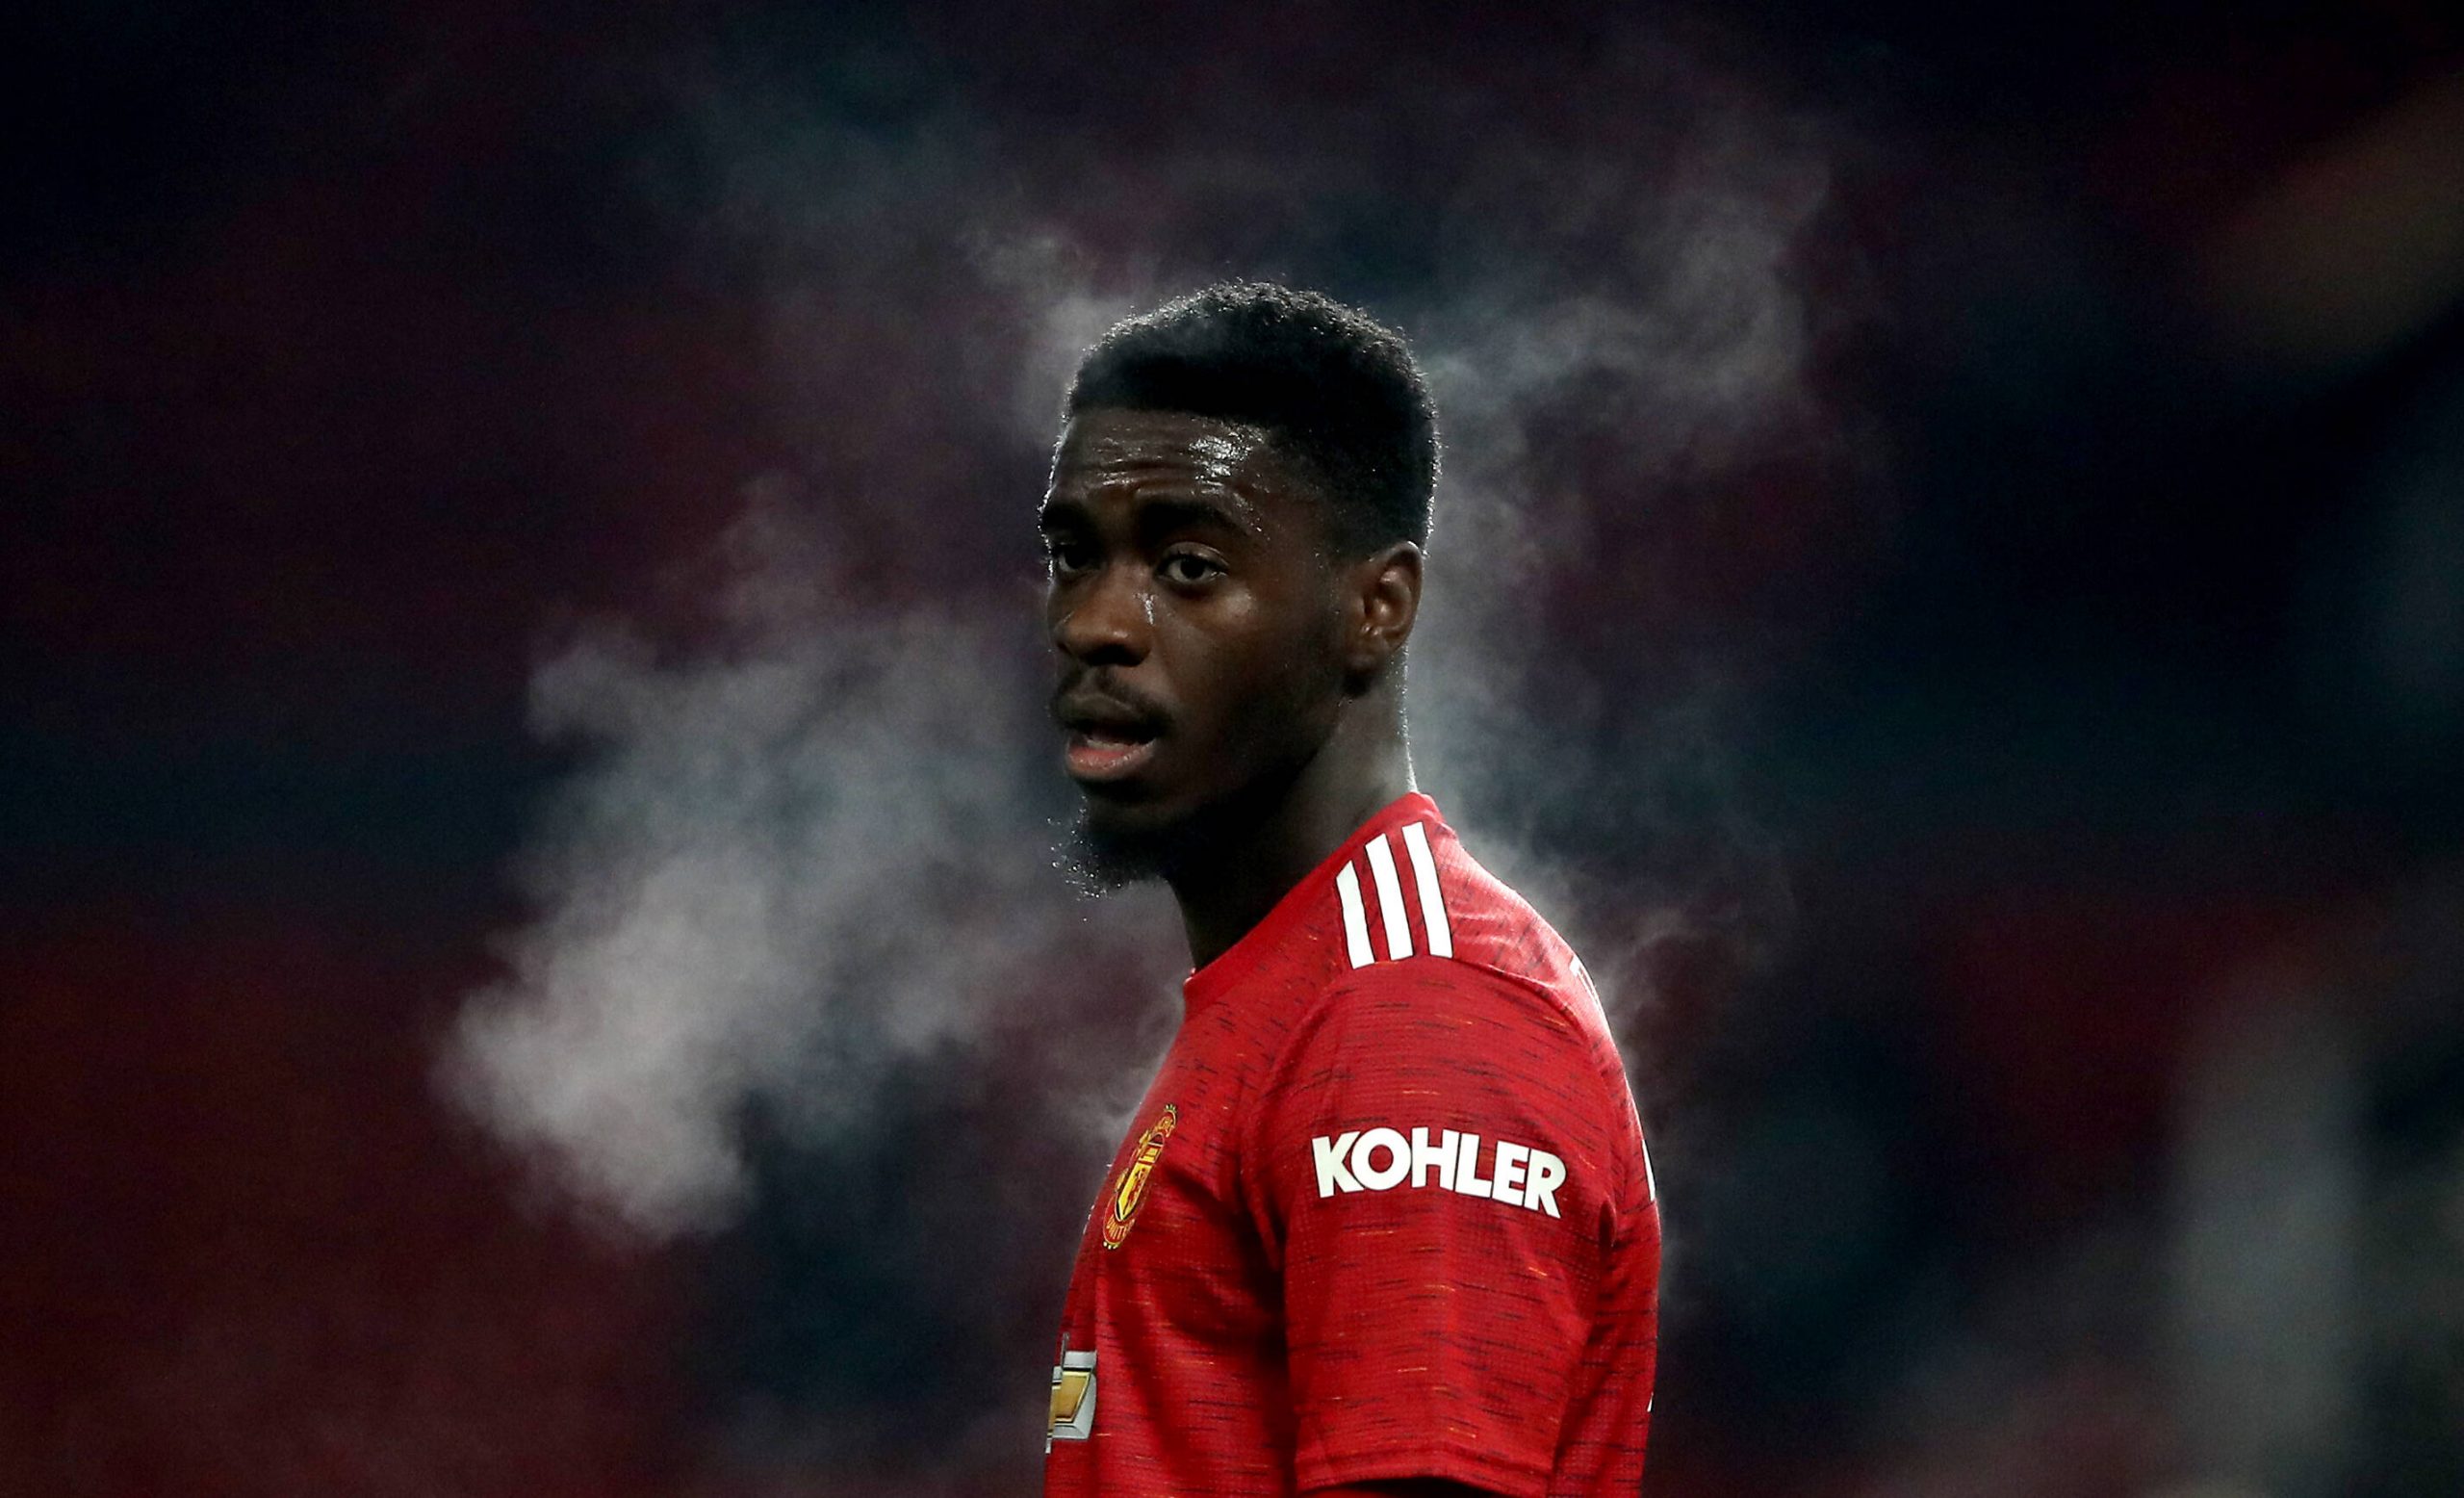 Axel Tuanzebe of Manchester United in action.